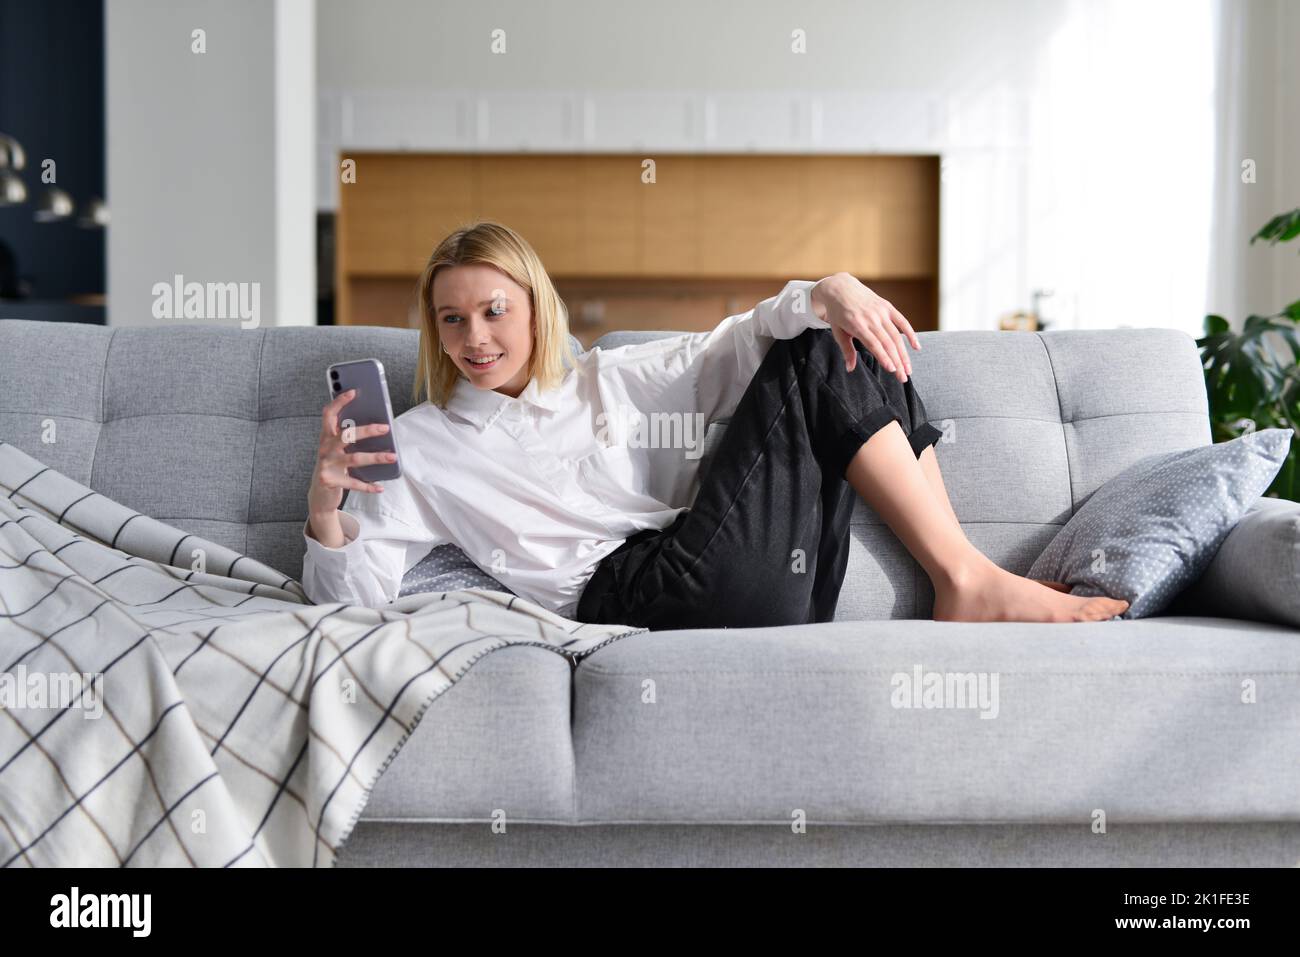 Woman with smartphone at home lying on sofa. Stock Photo